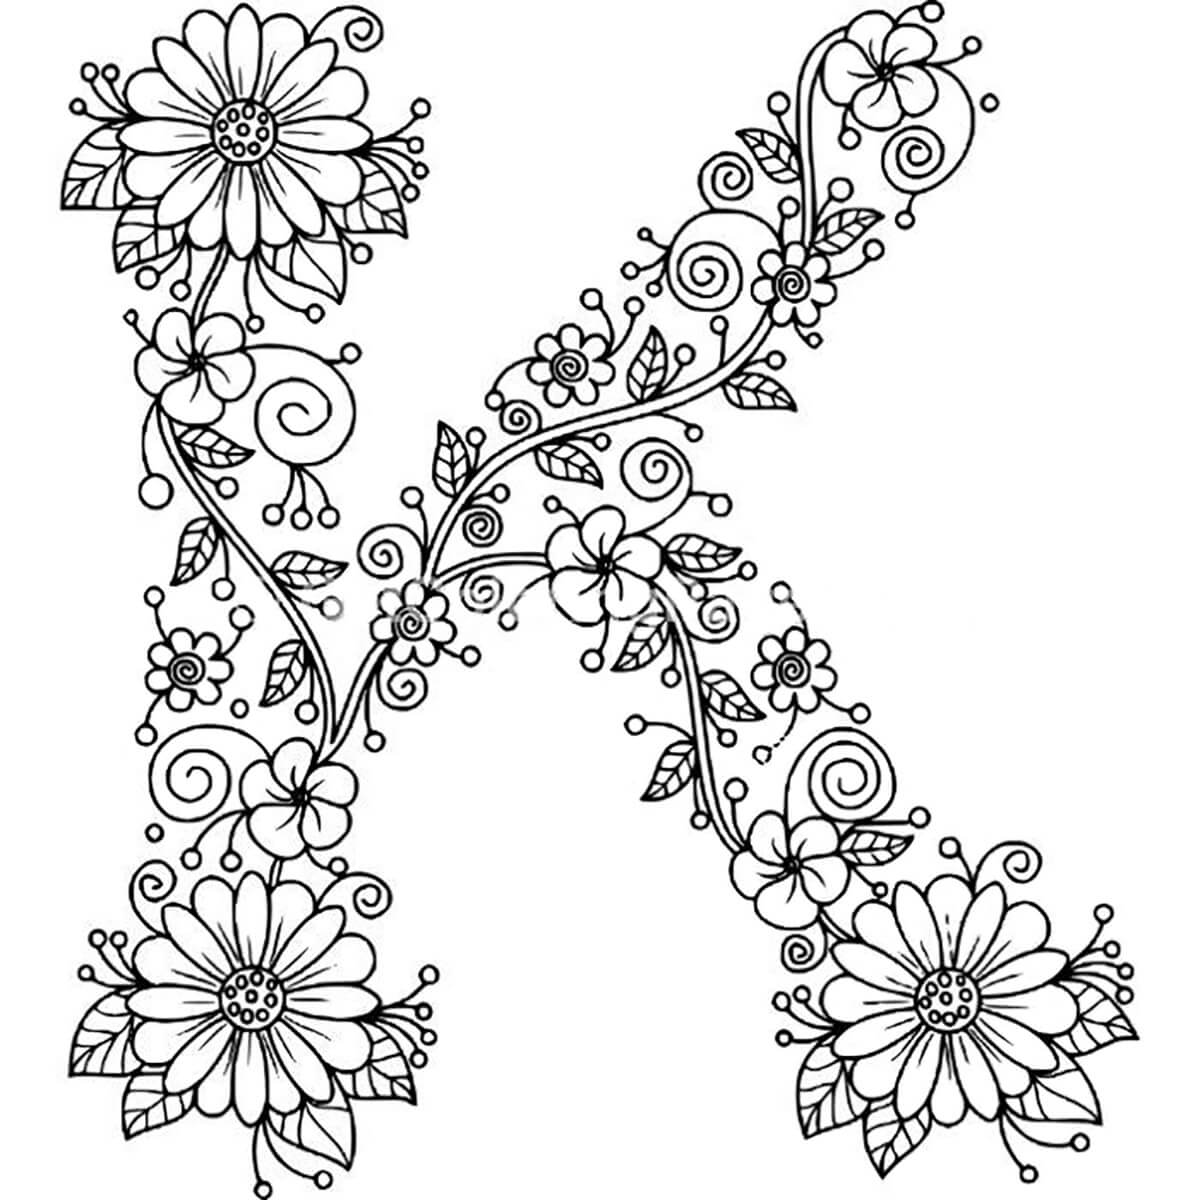 Flower Letter K Coloring Page - Free Printable Coloring Pages for Kids